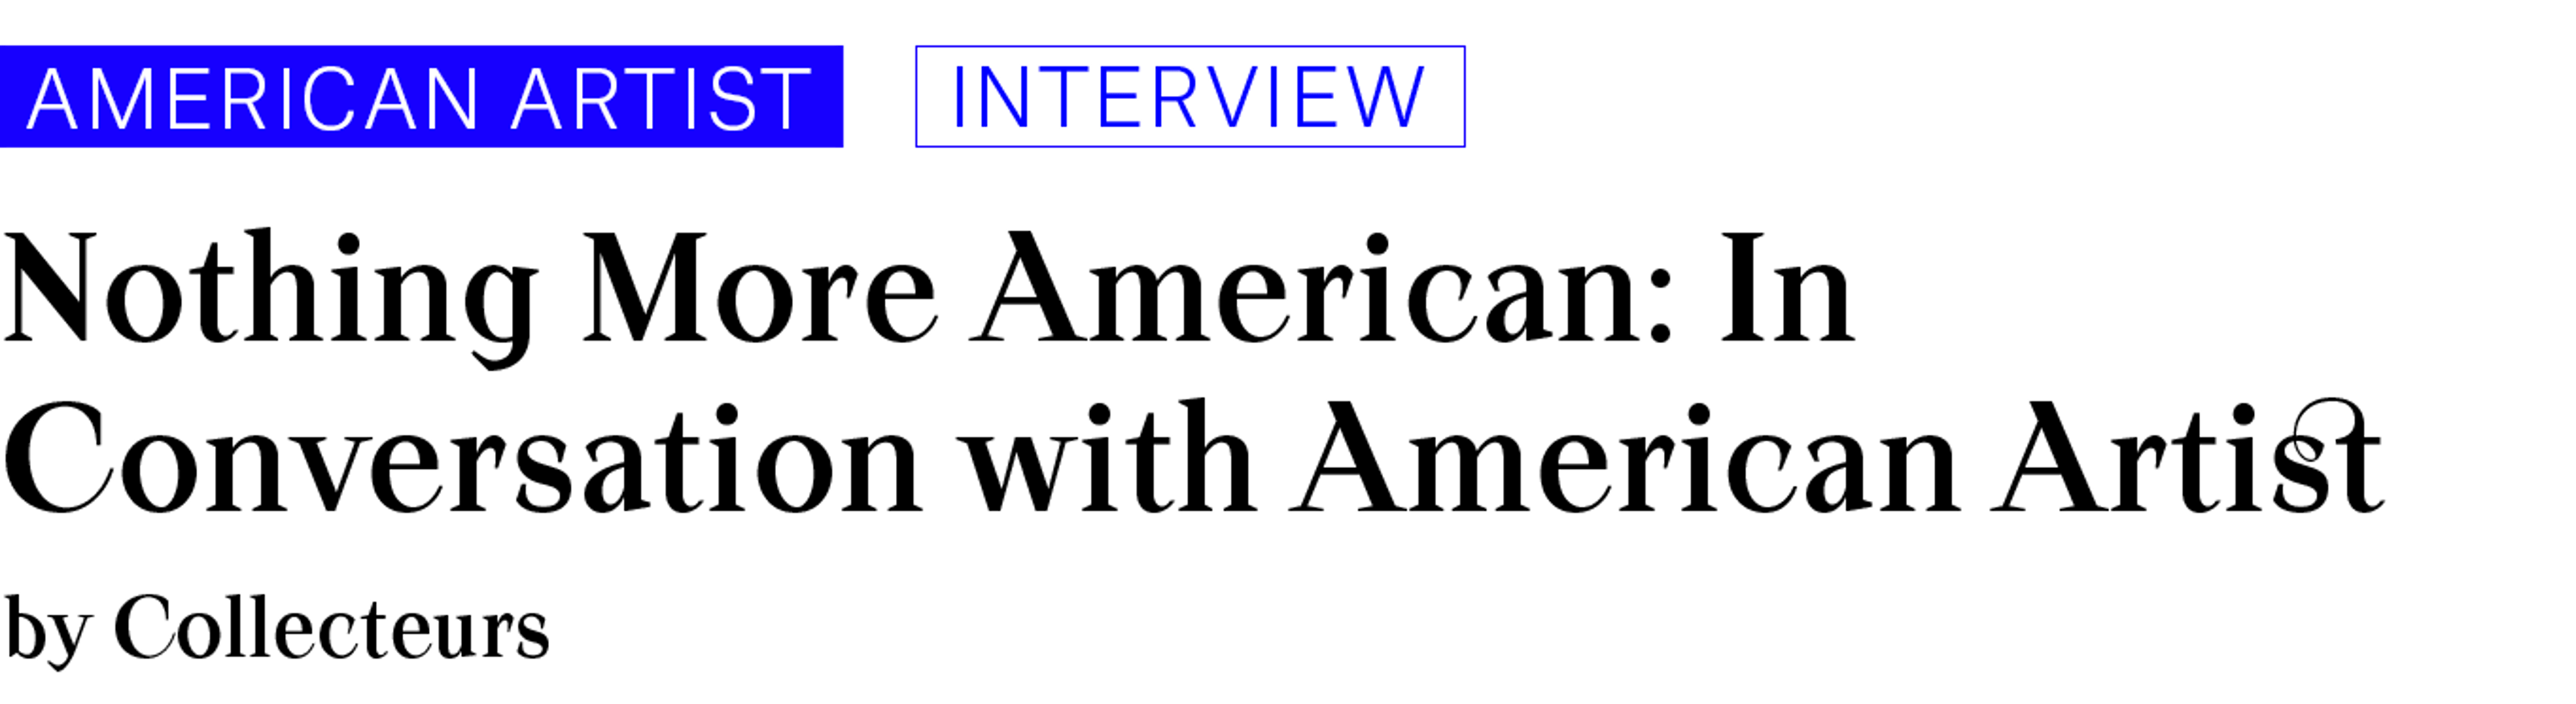 American Artist, Interview. Nothing More American: In Conversation with American Artist. By Collecteurs